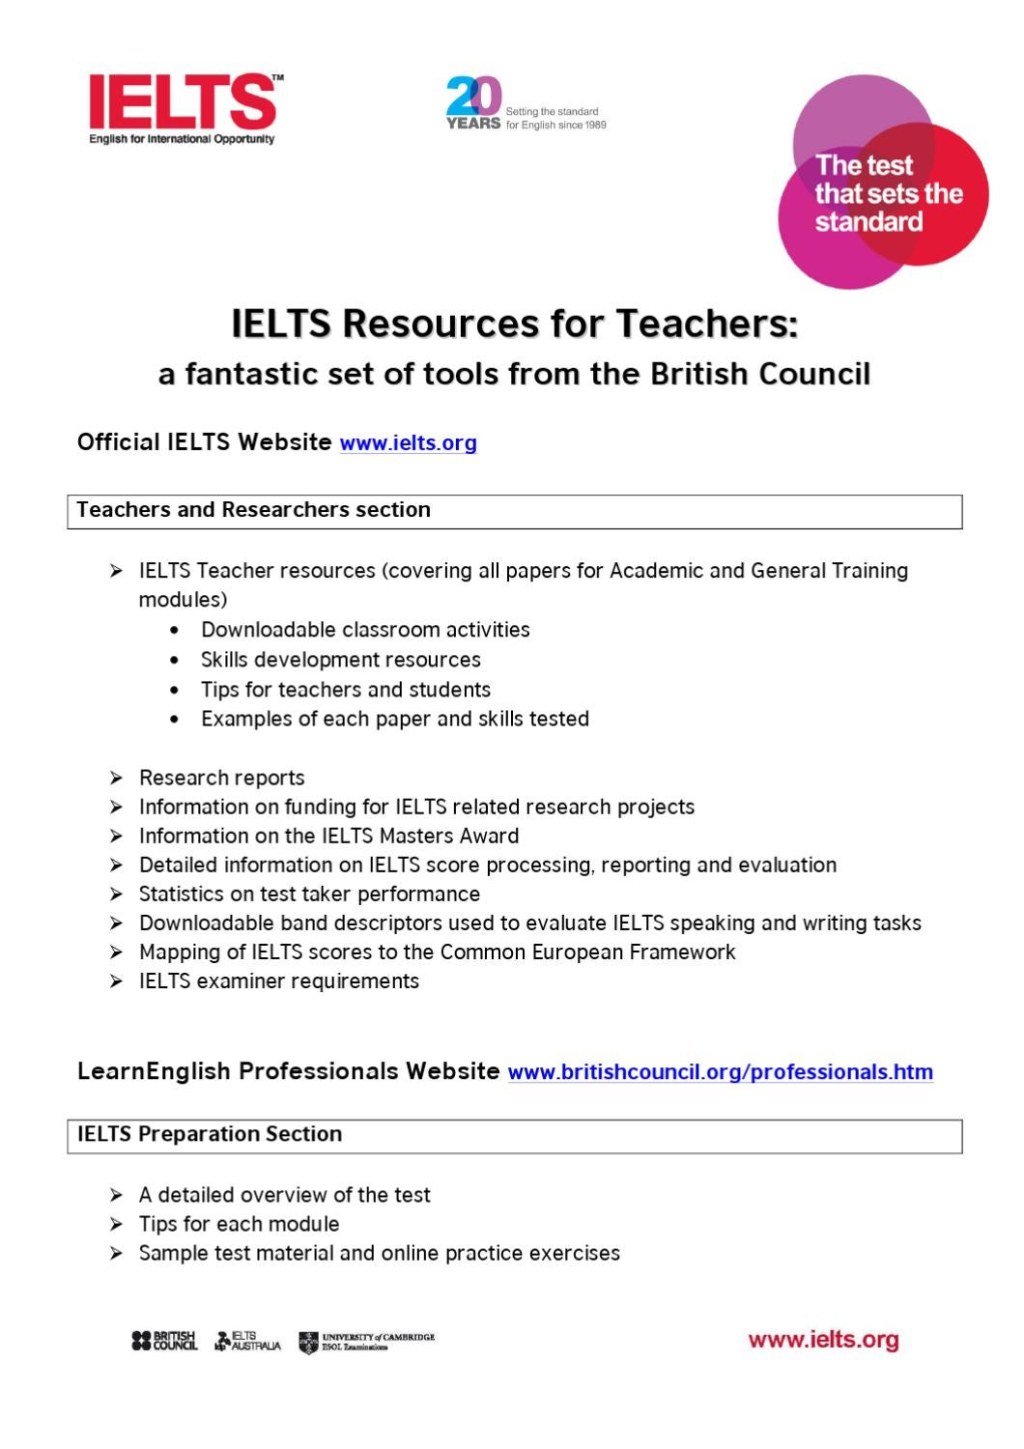 Picture of: IELTS Resources for Teachers by British Council – Issuu